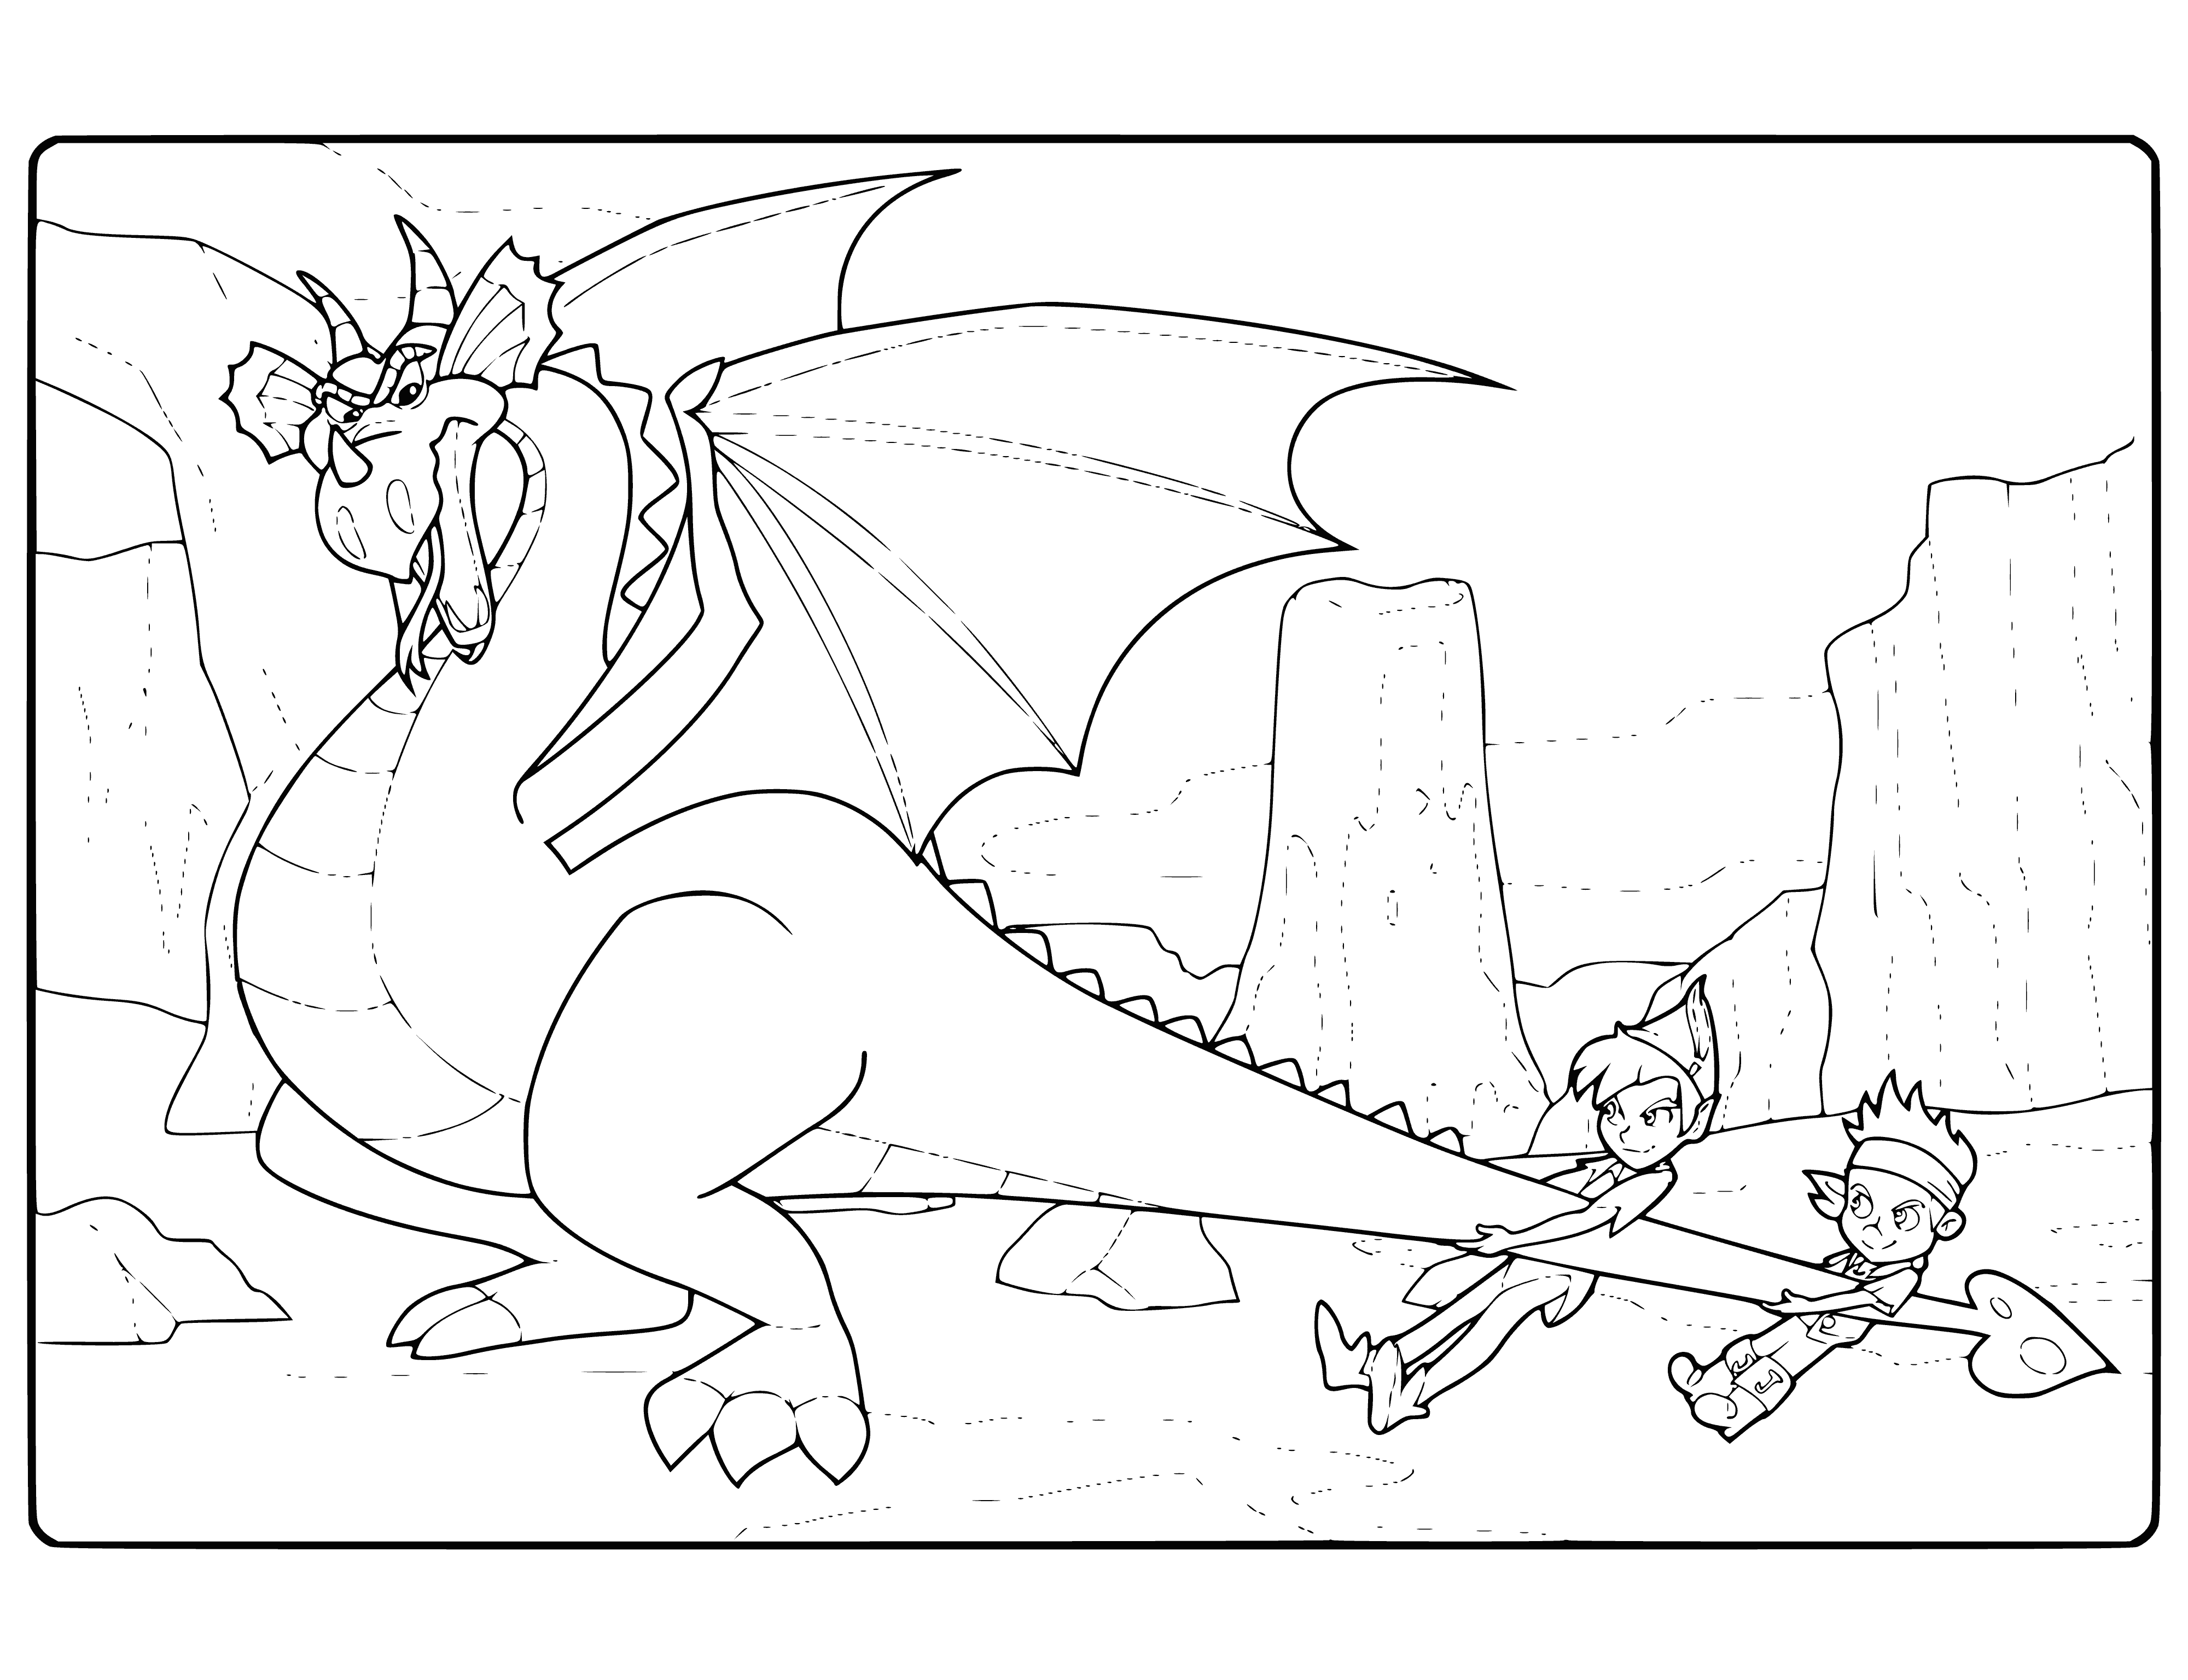 coloring page: Jake & Peter distract dragon with drum & flying. Dragon looks up w/mouth open.